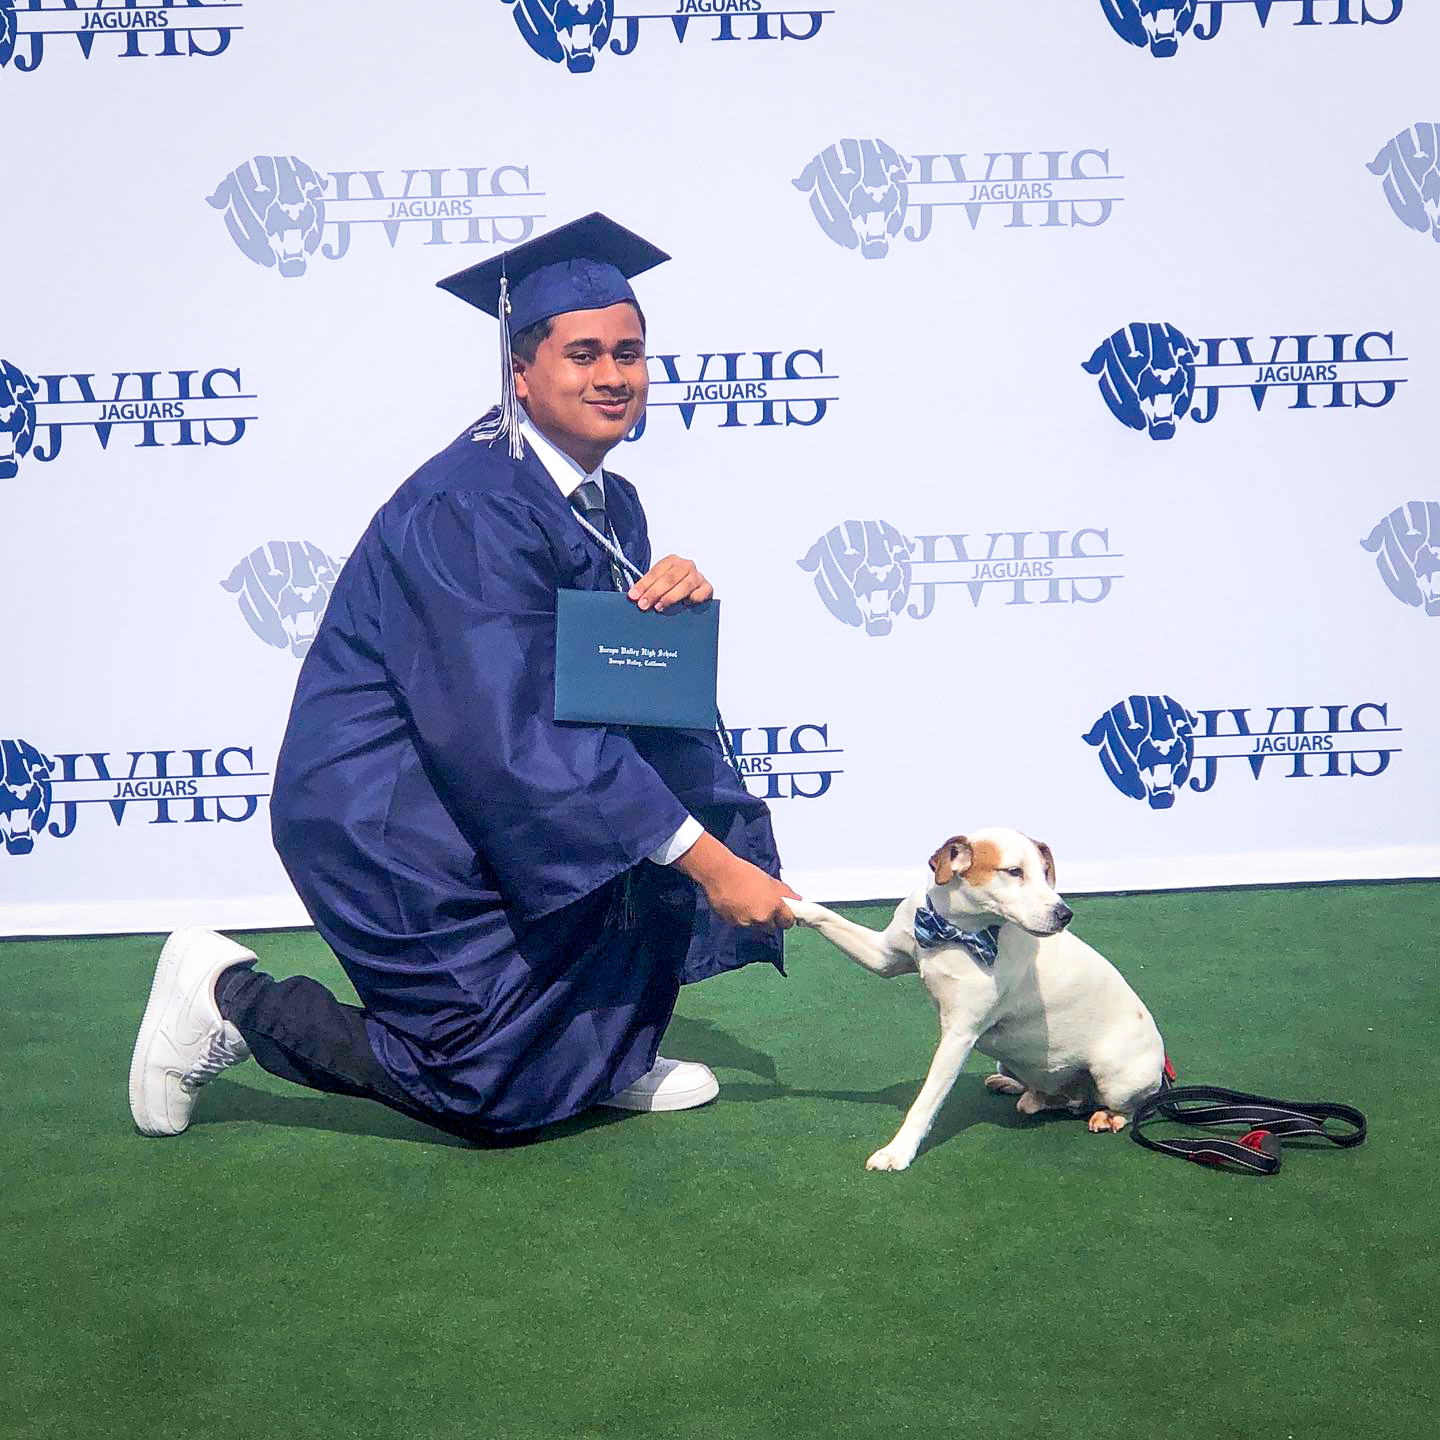 JVHS graduate shakes paw of dog while holding diploma